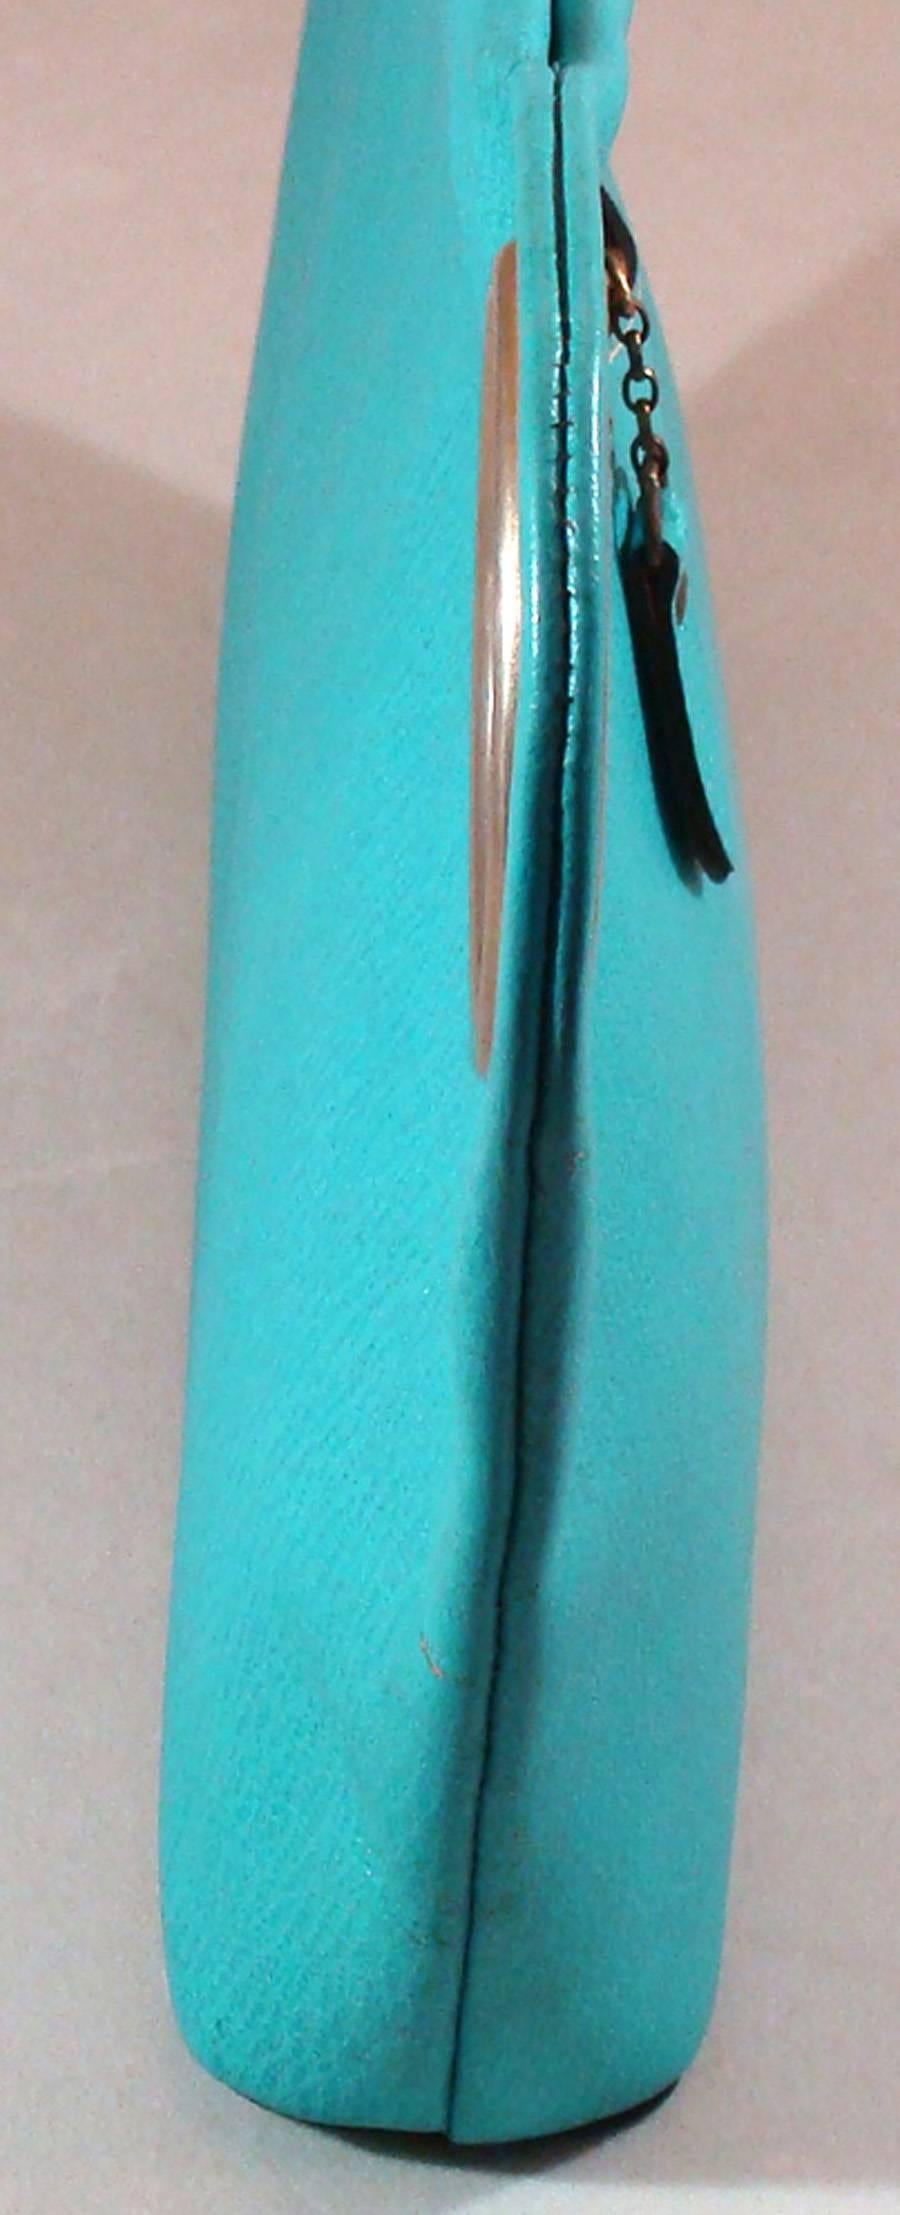 Women's or Men's Mod and Large Asymetrical Turquoise Pebble Grain Leather Clutch  Spring!  